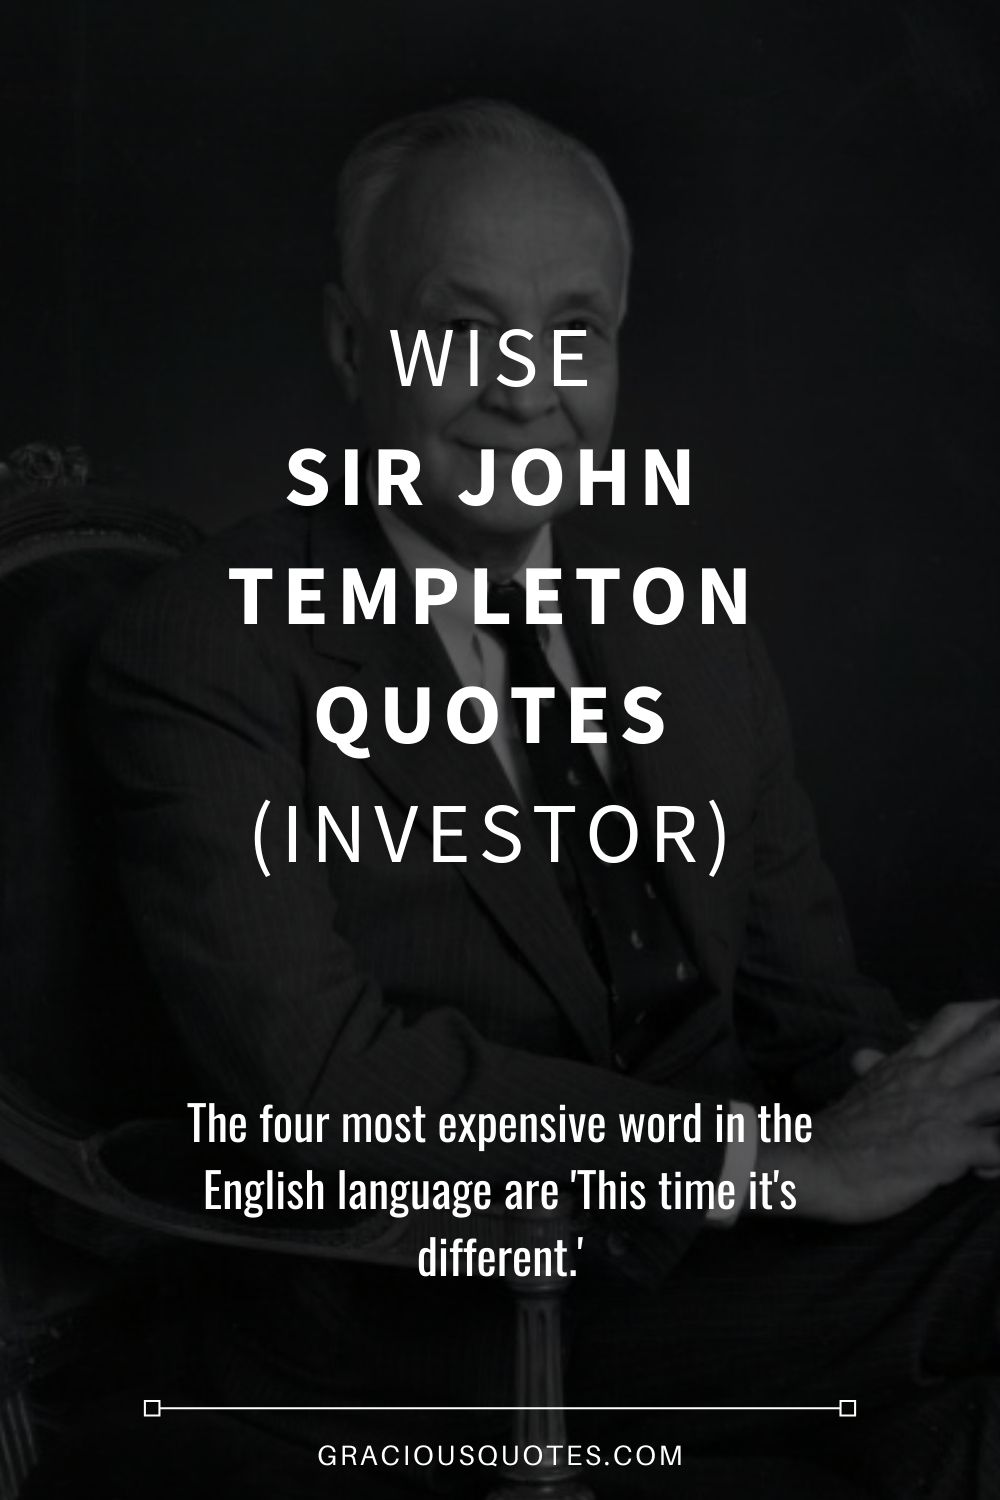 Wise Sir John Templeton Quotes (INVESTOR) - Gracious Quotes